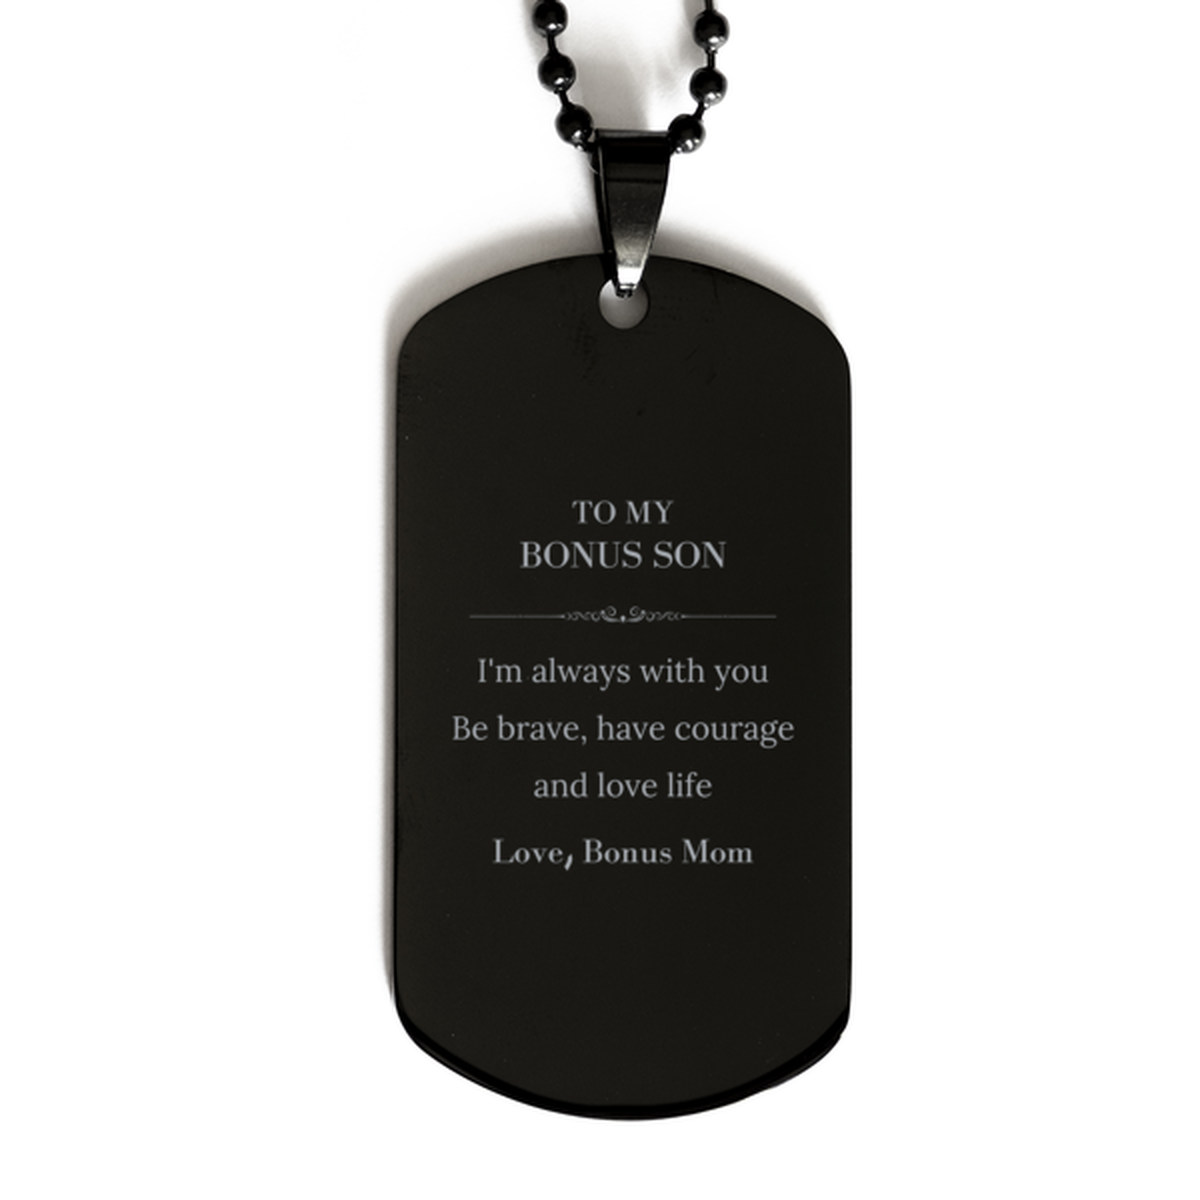 To My Bonus Son Gifts from Bonus Mom, Unique Black Dog Tag Inspirational Christmas Birthday Graduation Gifts for Bonus Son I'm always with you. Be brave, have courage and love life. Love, Bonus Mom